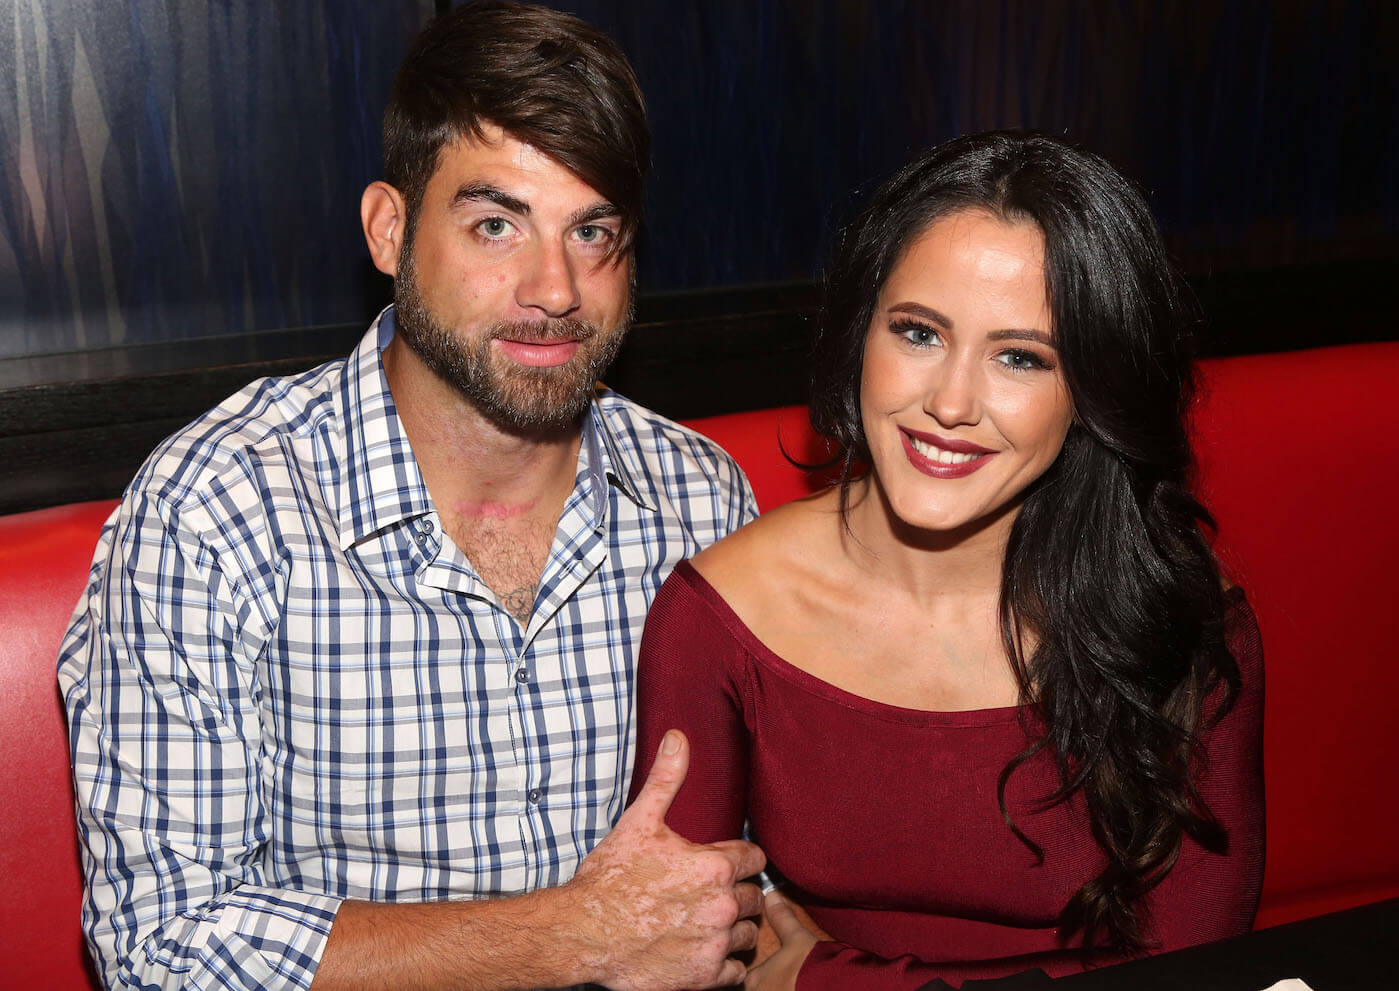 'Teen Mom' stars David Eason and Jenelle Evans sitting side by side